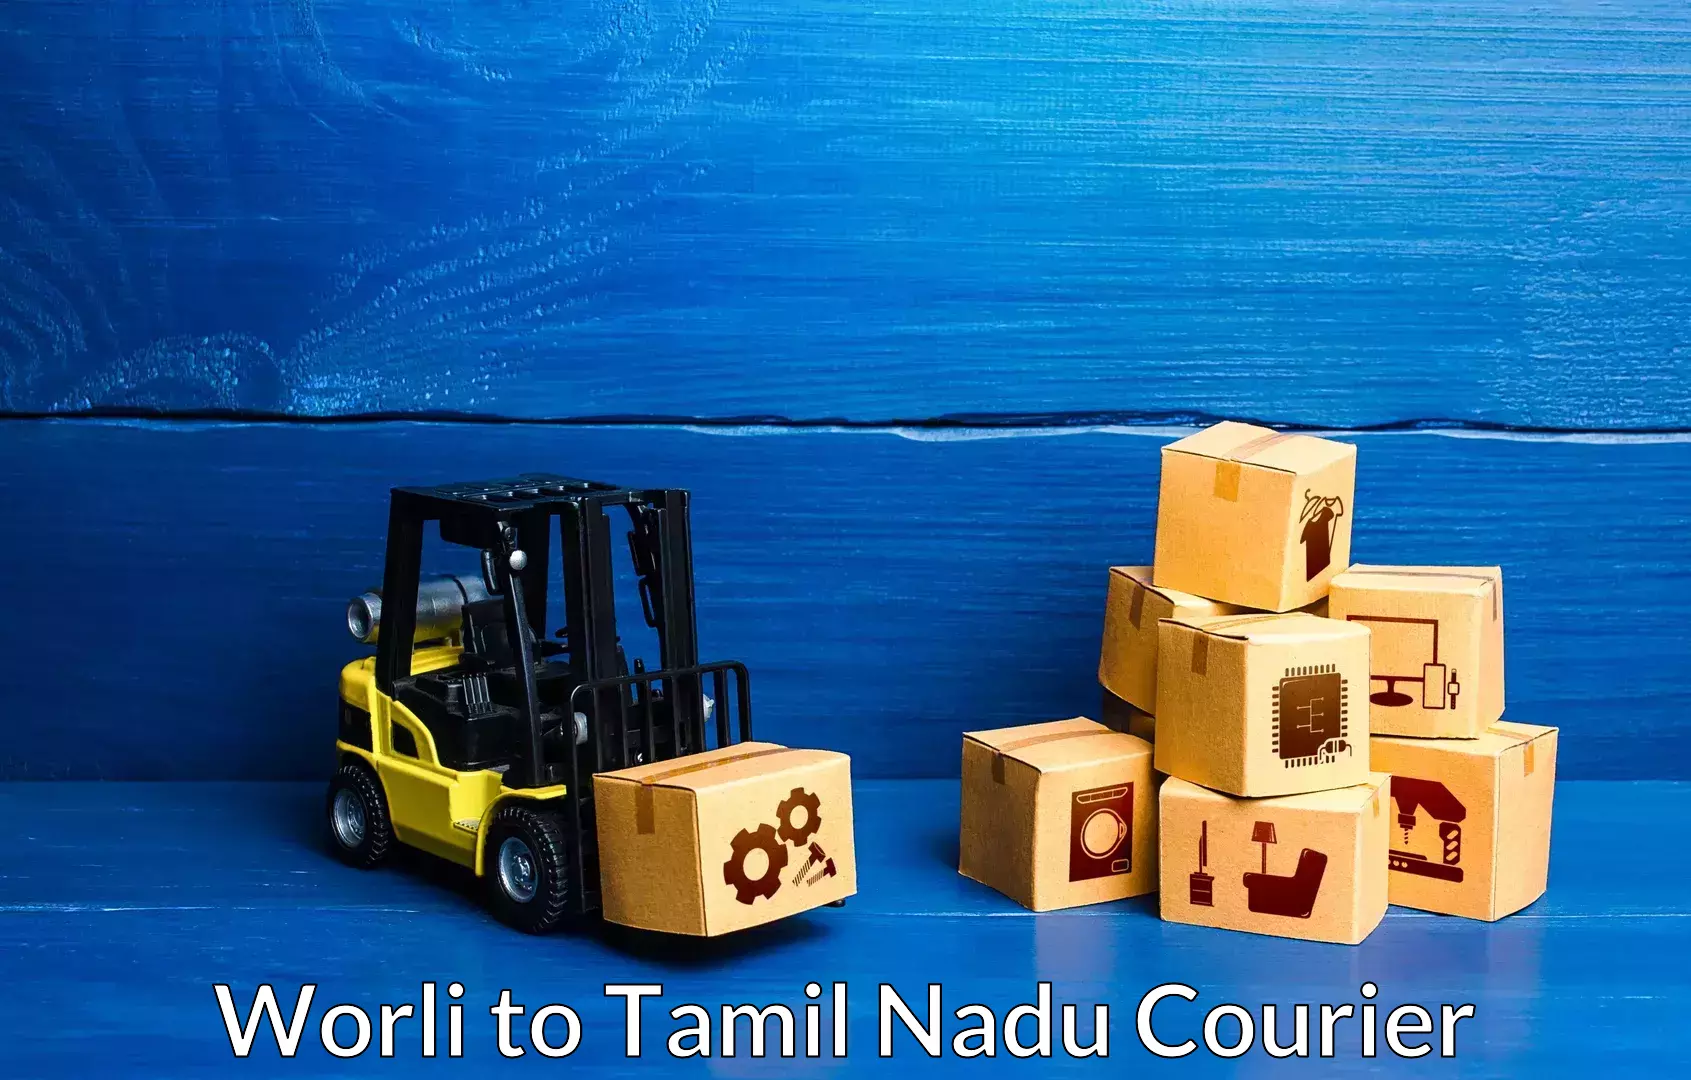 Moving and packing experts Worli to Valparai